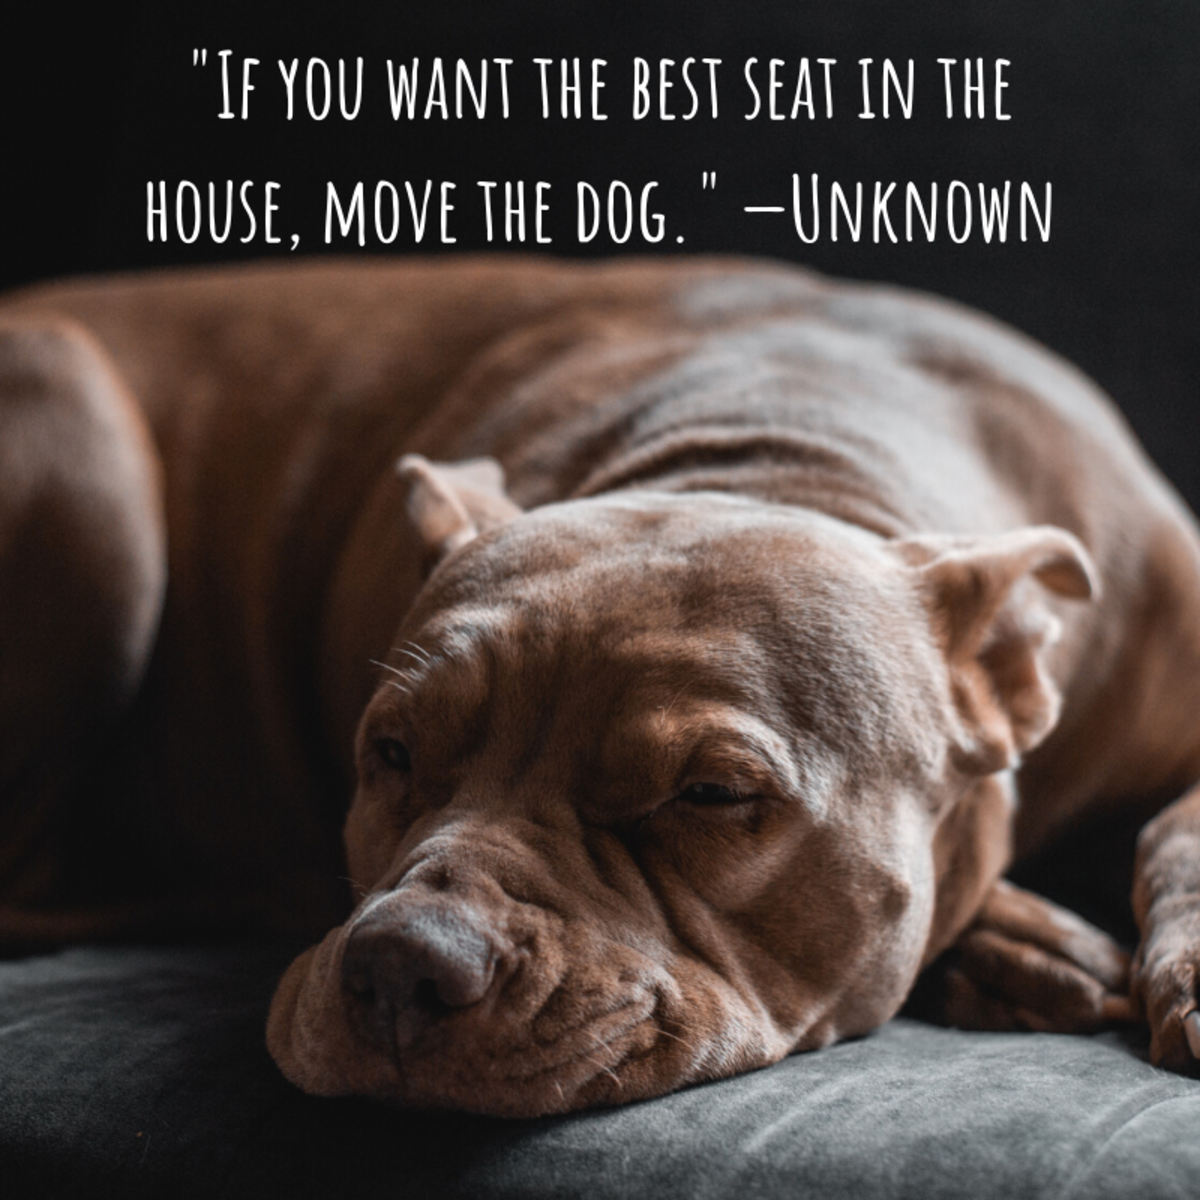 "If you want the best seat in the house, move the dog." —Unknown